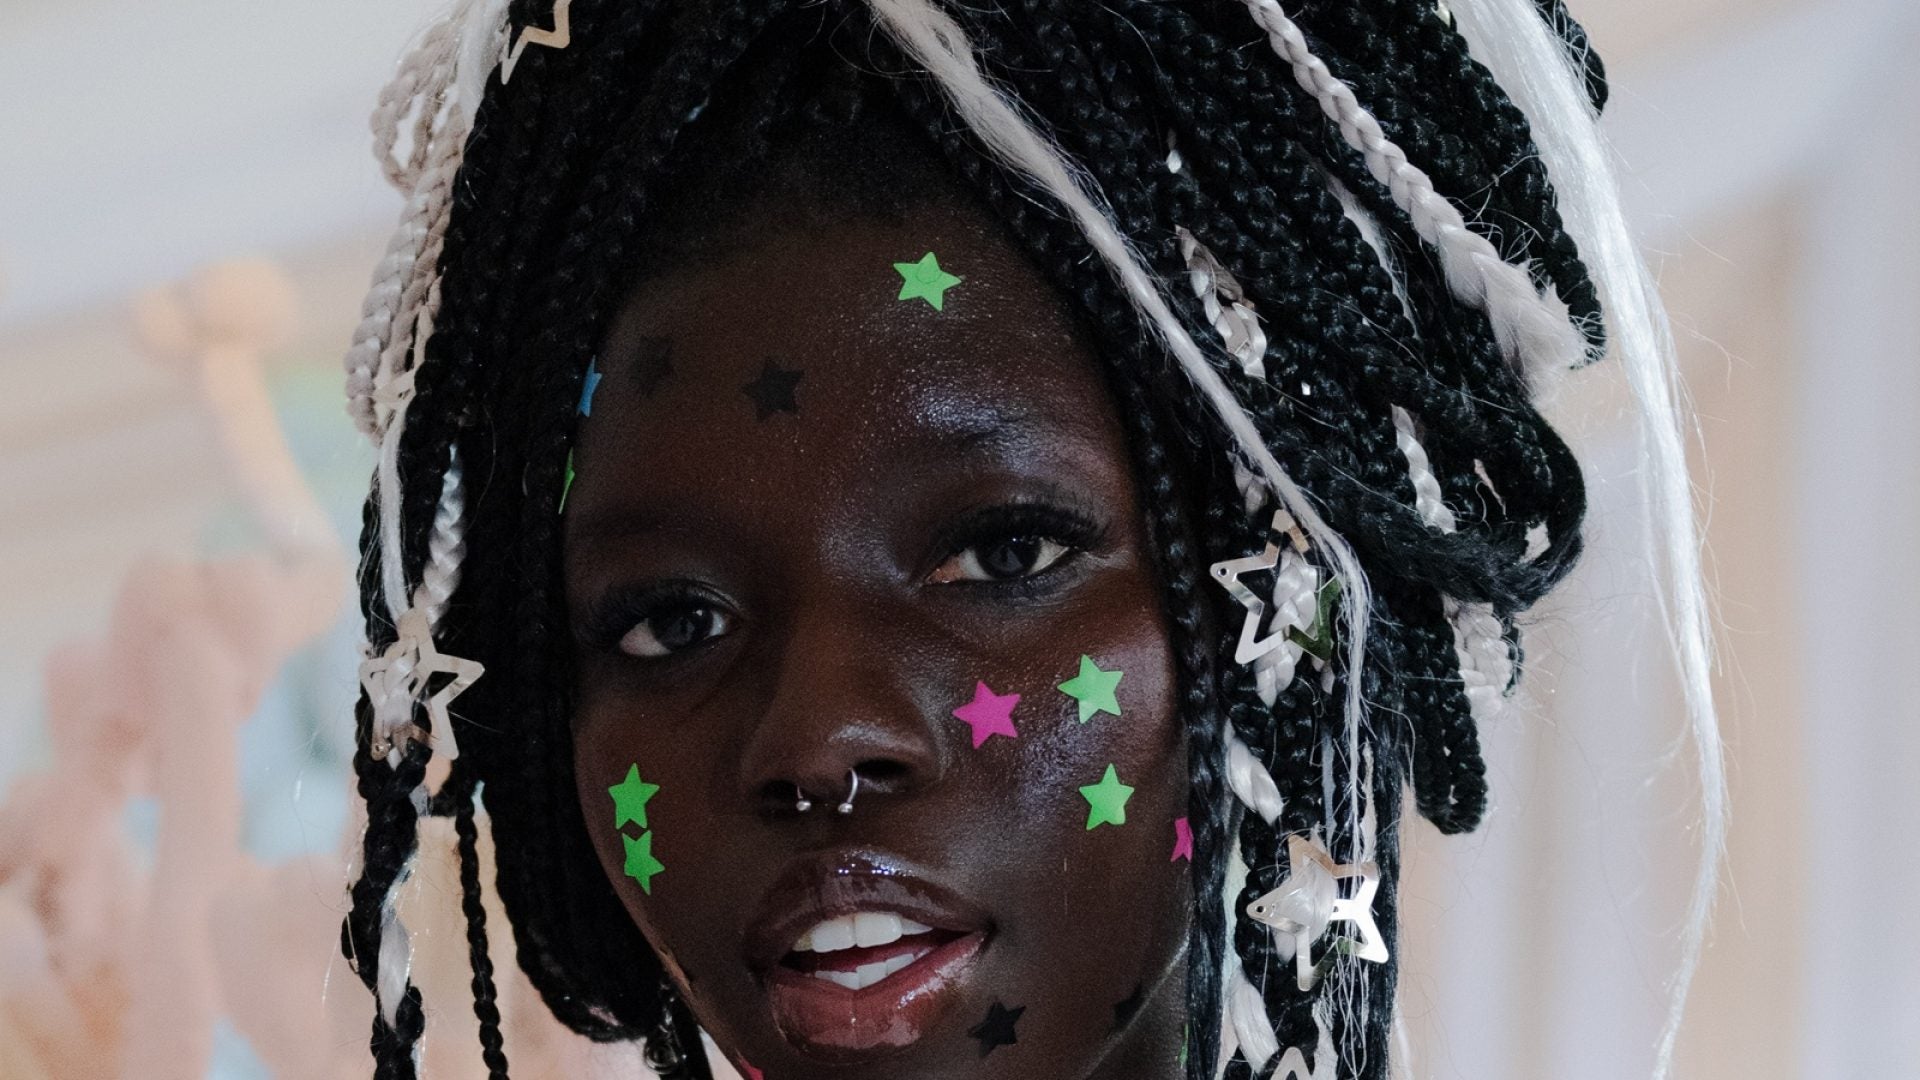 Starface, Glossier Collaborate On New Limited Edition Zit Stickers